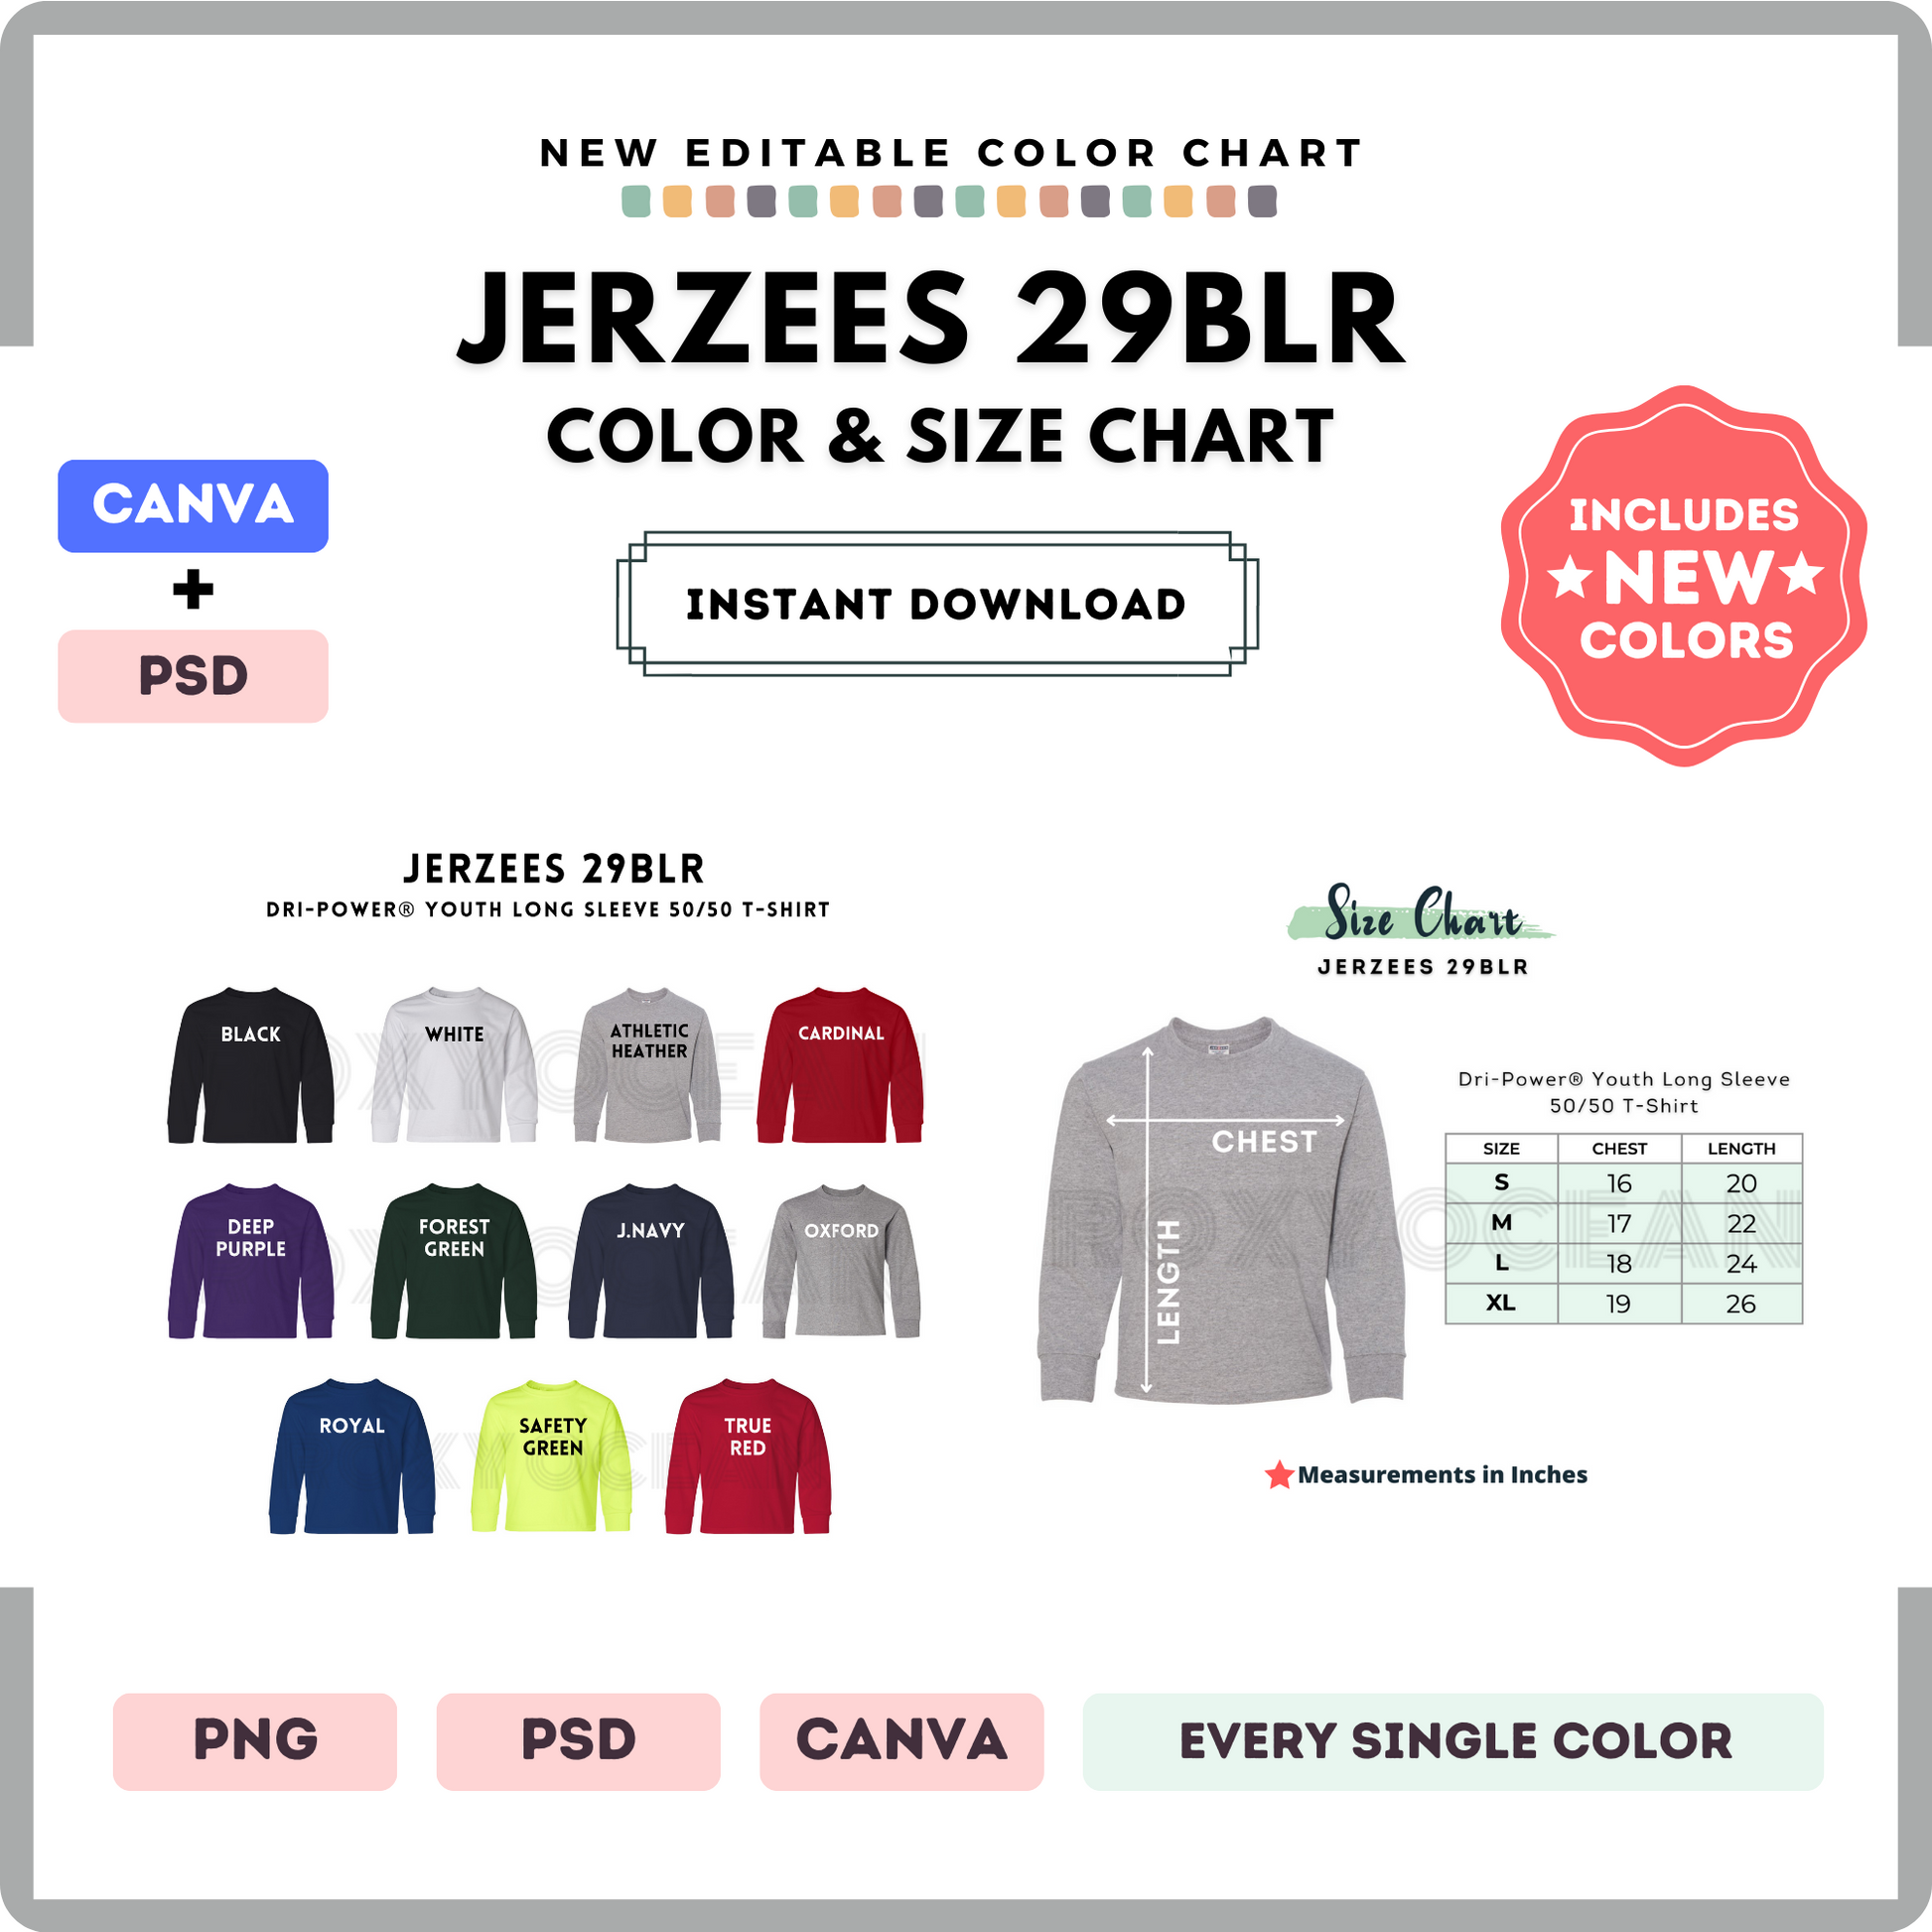 Jerzees 29BLR Color and Size Chart